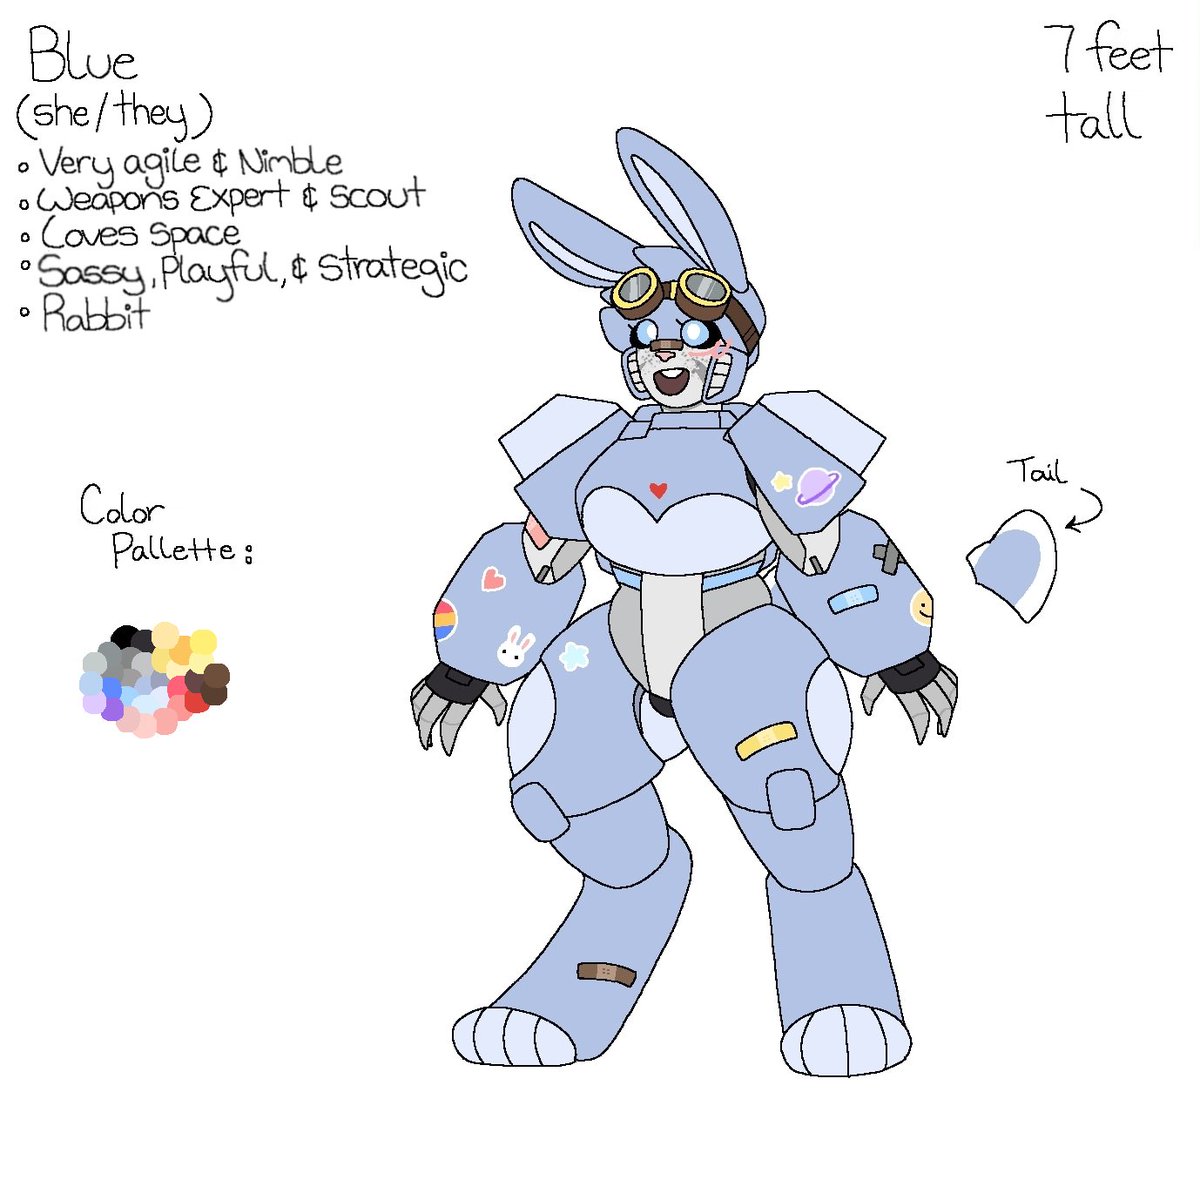 💙Bnuy!1!💙
guys- send me your transformers ocs or ocs in general cuz I wanna do a height comparison between them and Blue- I thought it'd be cute- por favor 🙏

#transformersoc 
#transformers
#tfoc